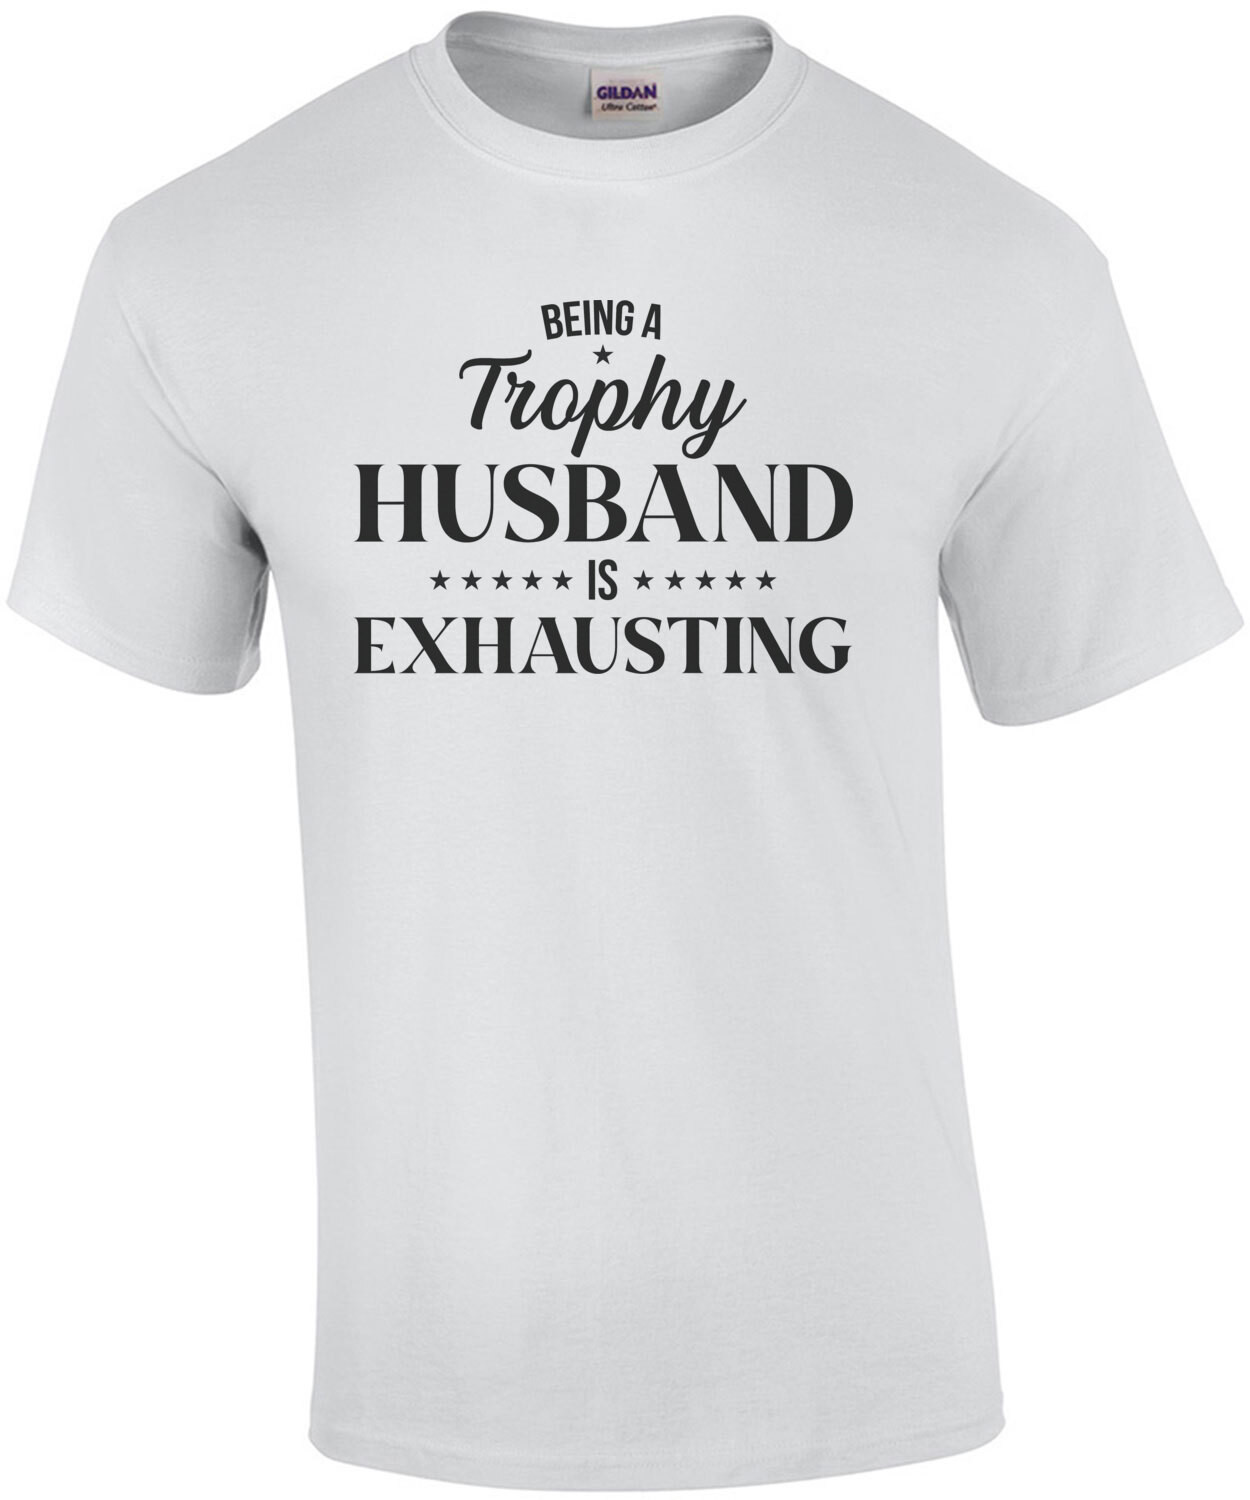 Being a Trophy Husband is Exhausting. Funny T-Shirt